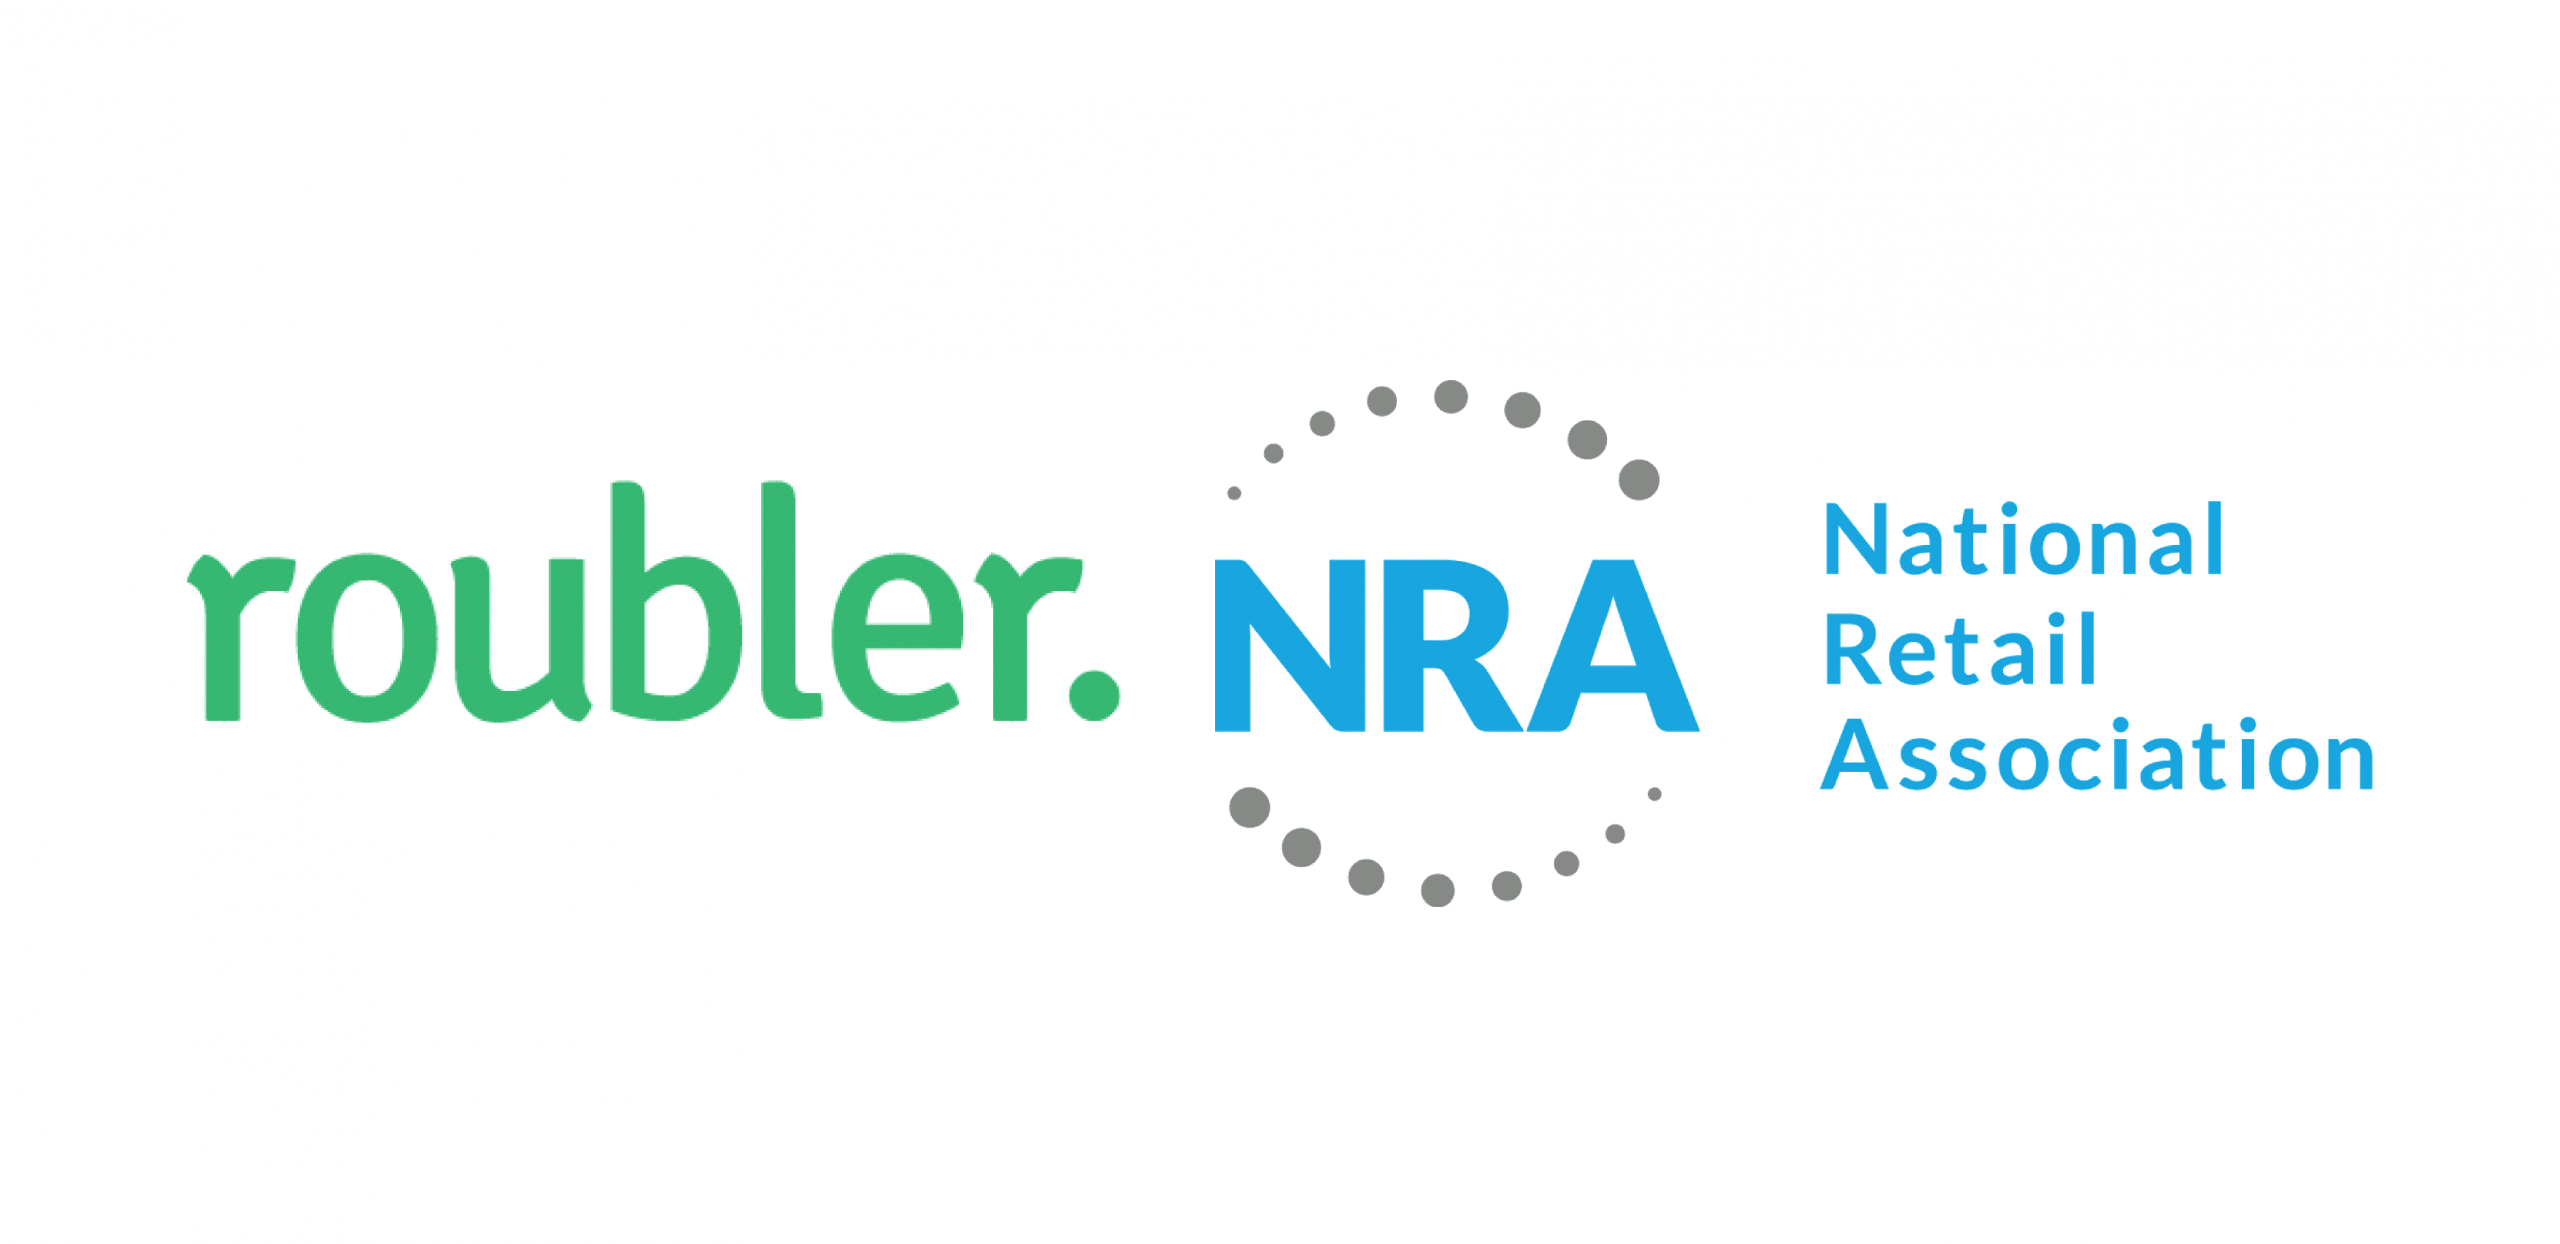 The NRA and Roubler partnership